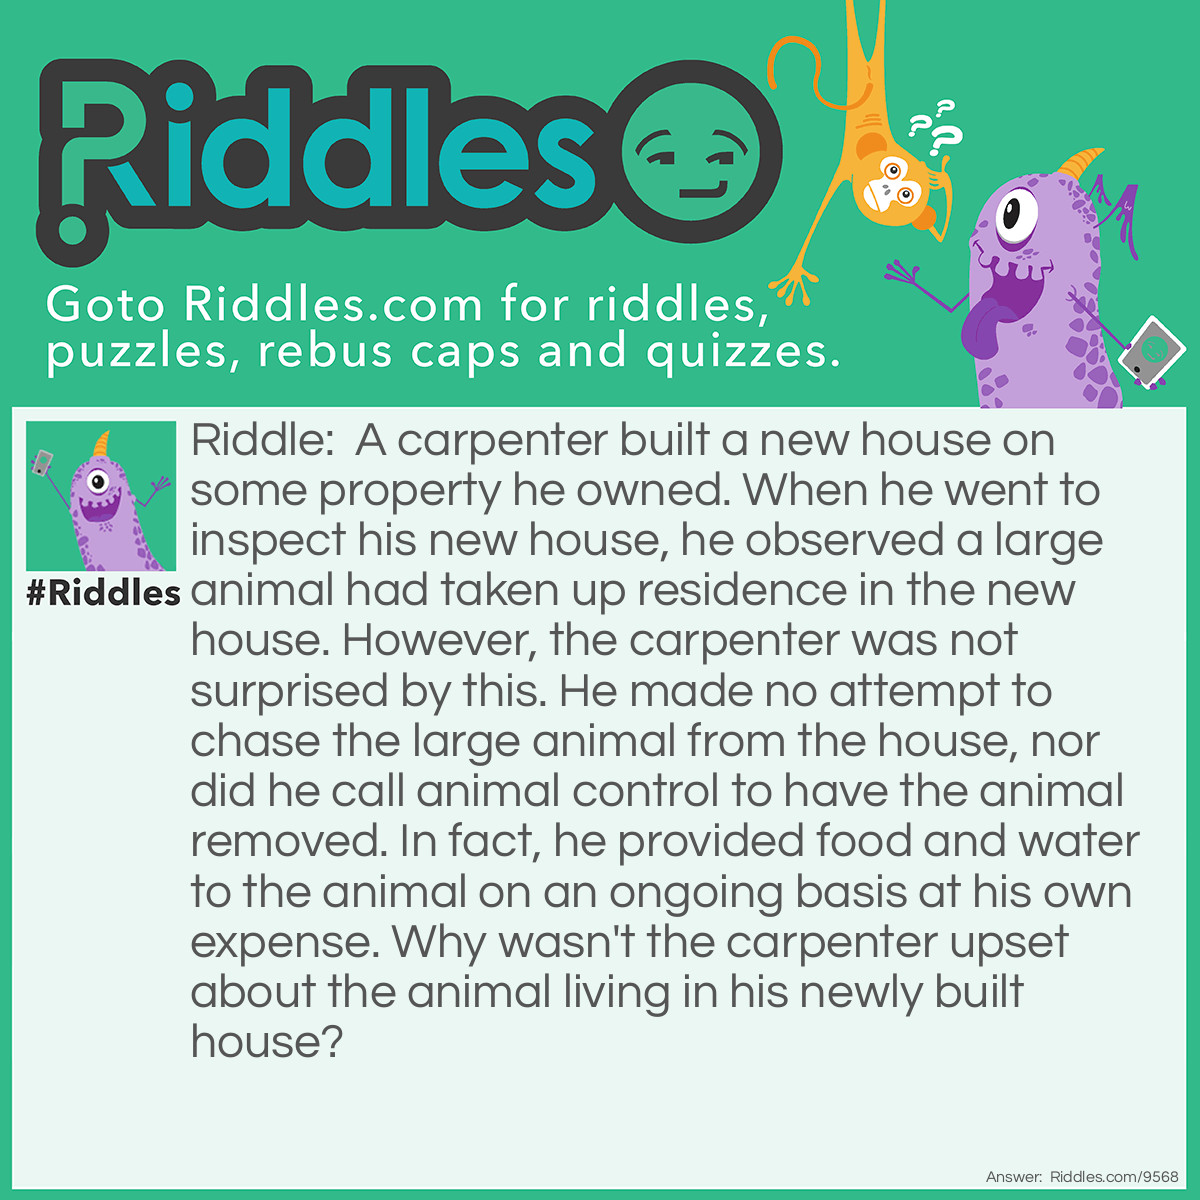 Riddle: A carpenter built a new house on some property he owned. When he went to inspect his new house, he observed a large animal had taken up residence in the new house. However, the carpenter was not surprised by this. He made no attempt to chase the large animal from the house, nor did he call animal control to have the animal removed. In fact, he provided food and water to the animal on an ongoing basis at his own expense. Why wasn't the carpenter upset about the animal living in his newly built house? Answer: The new house the carpenter had just built was a dog house. He built it for the new dog he had just purchased ----- a massive Saint Bernard.